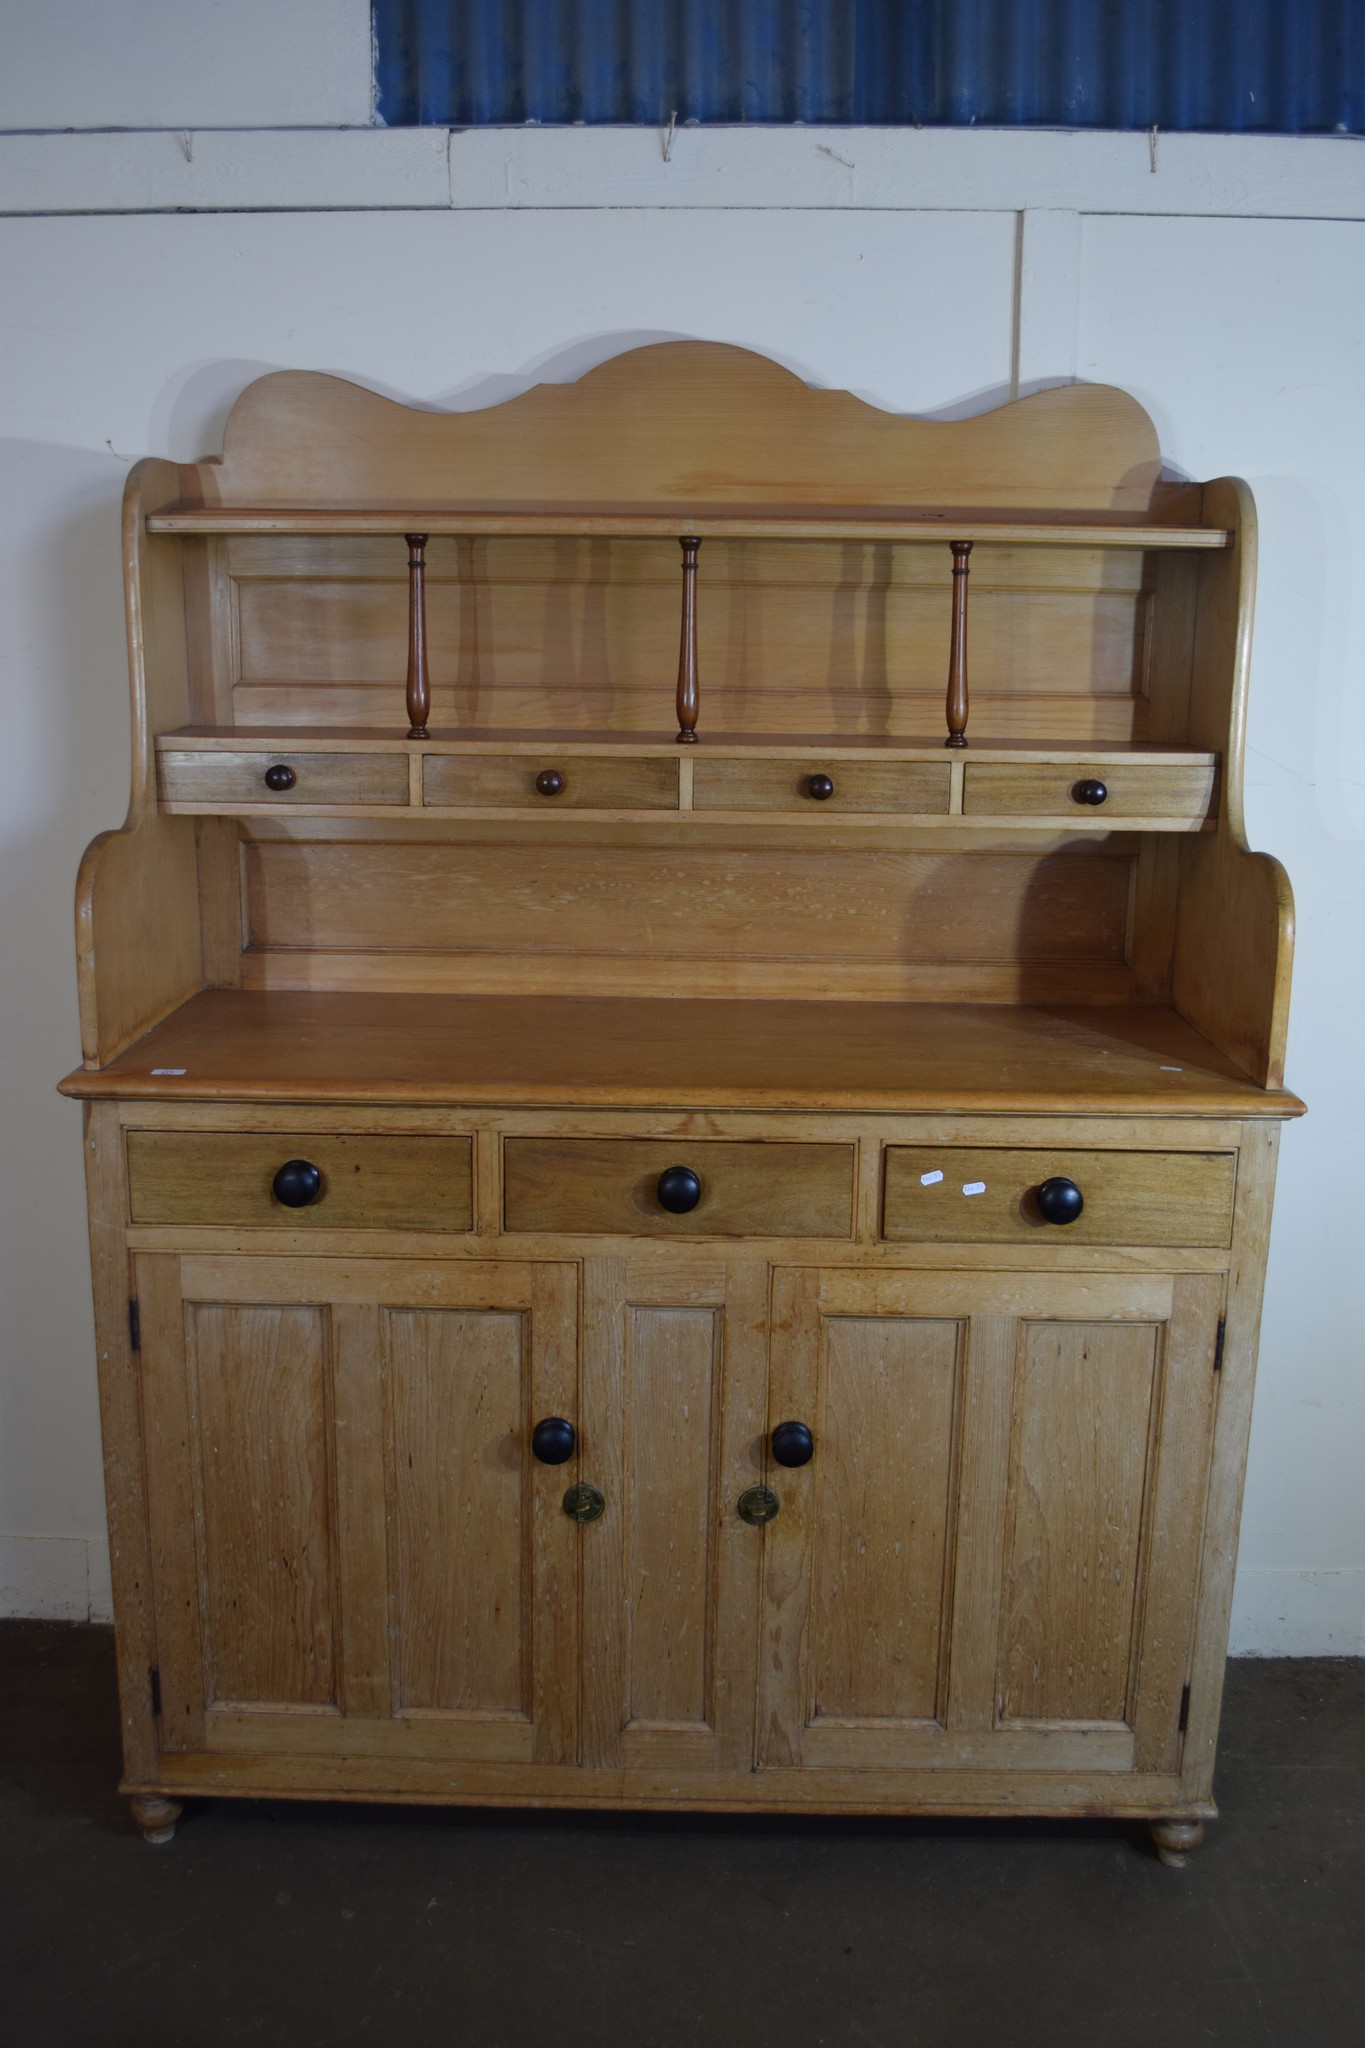 LARGE HEAVY EARLY 20TH CENTURY KITCHEN DRESSER, WIDTH APPROX 144CM